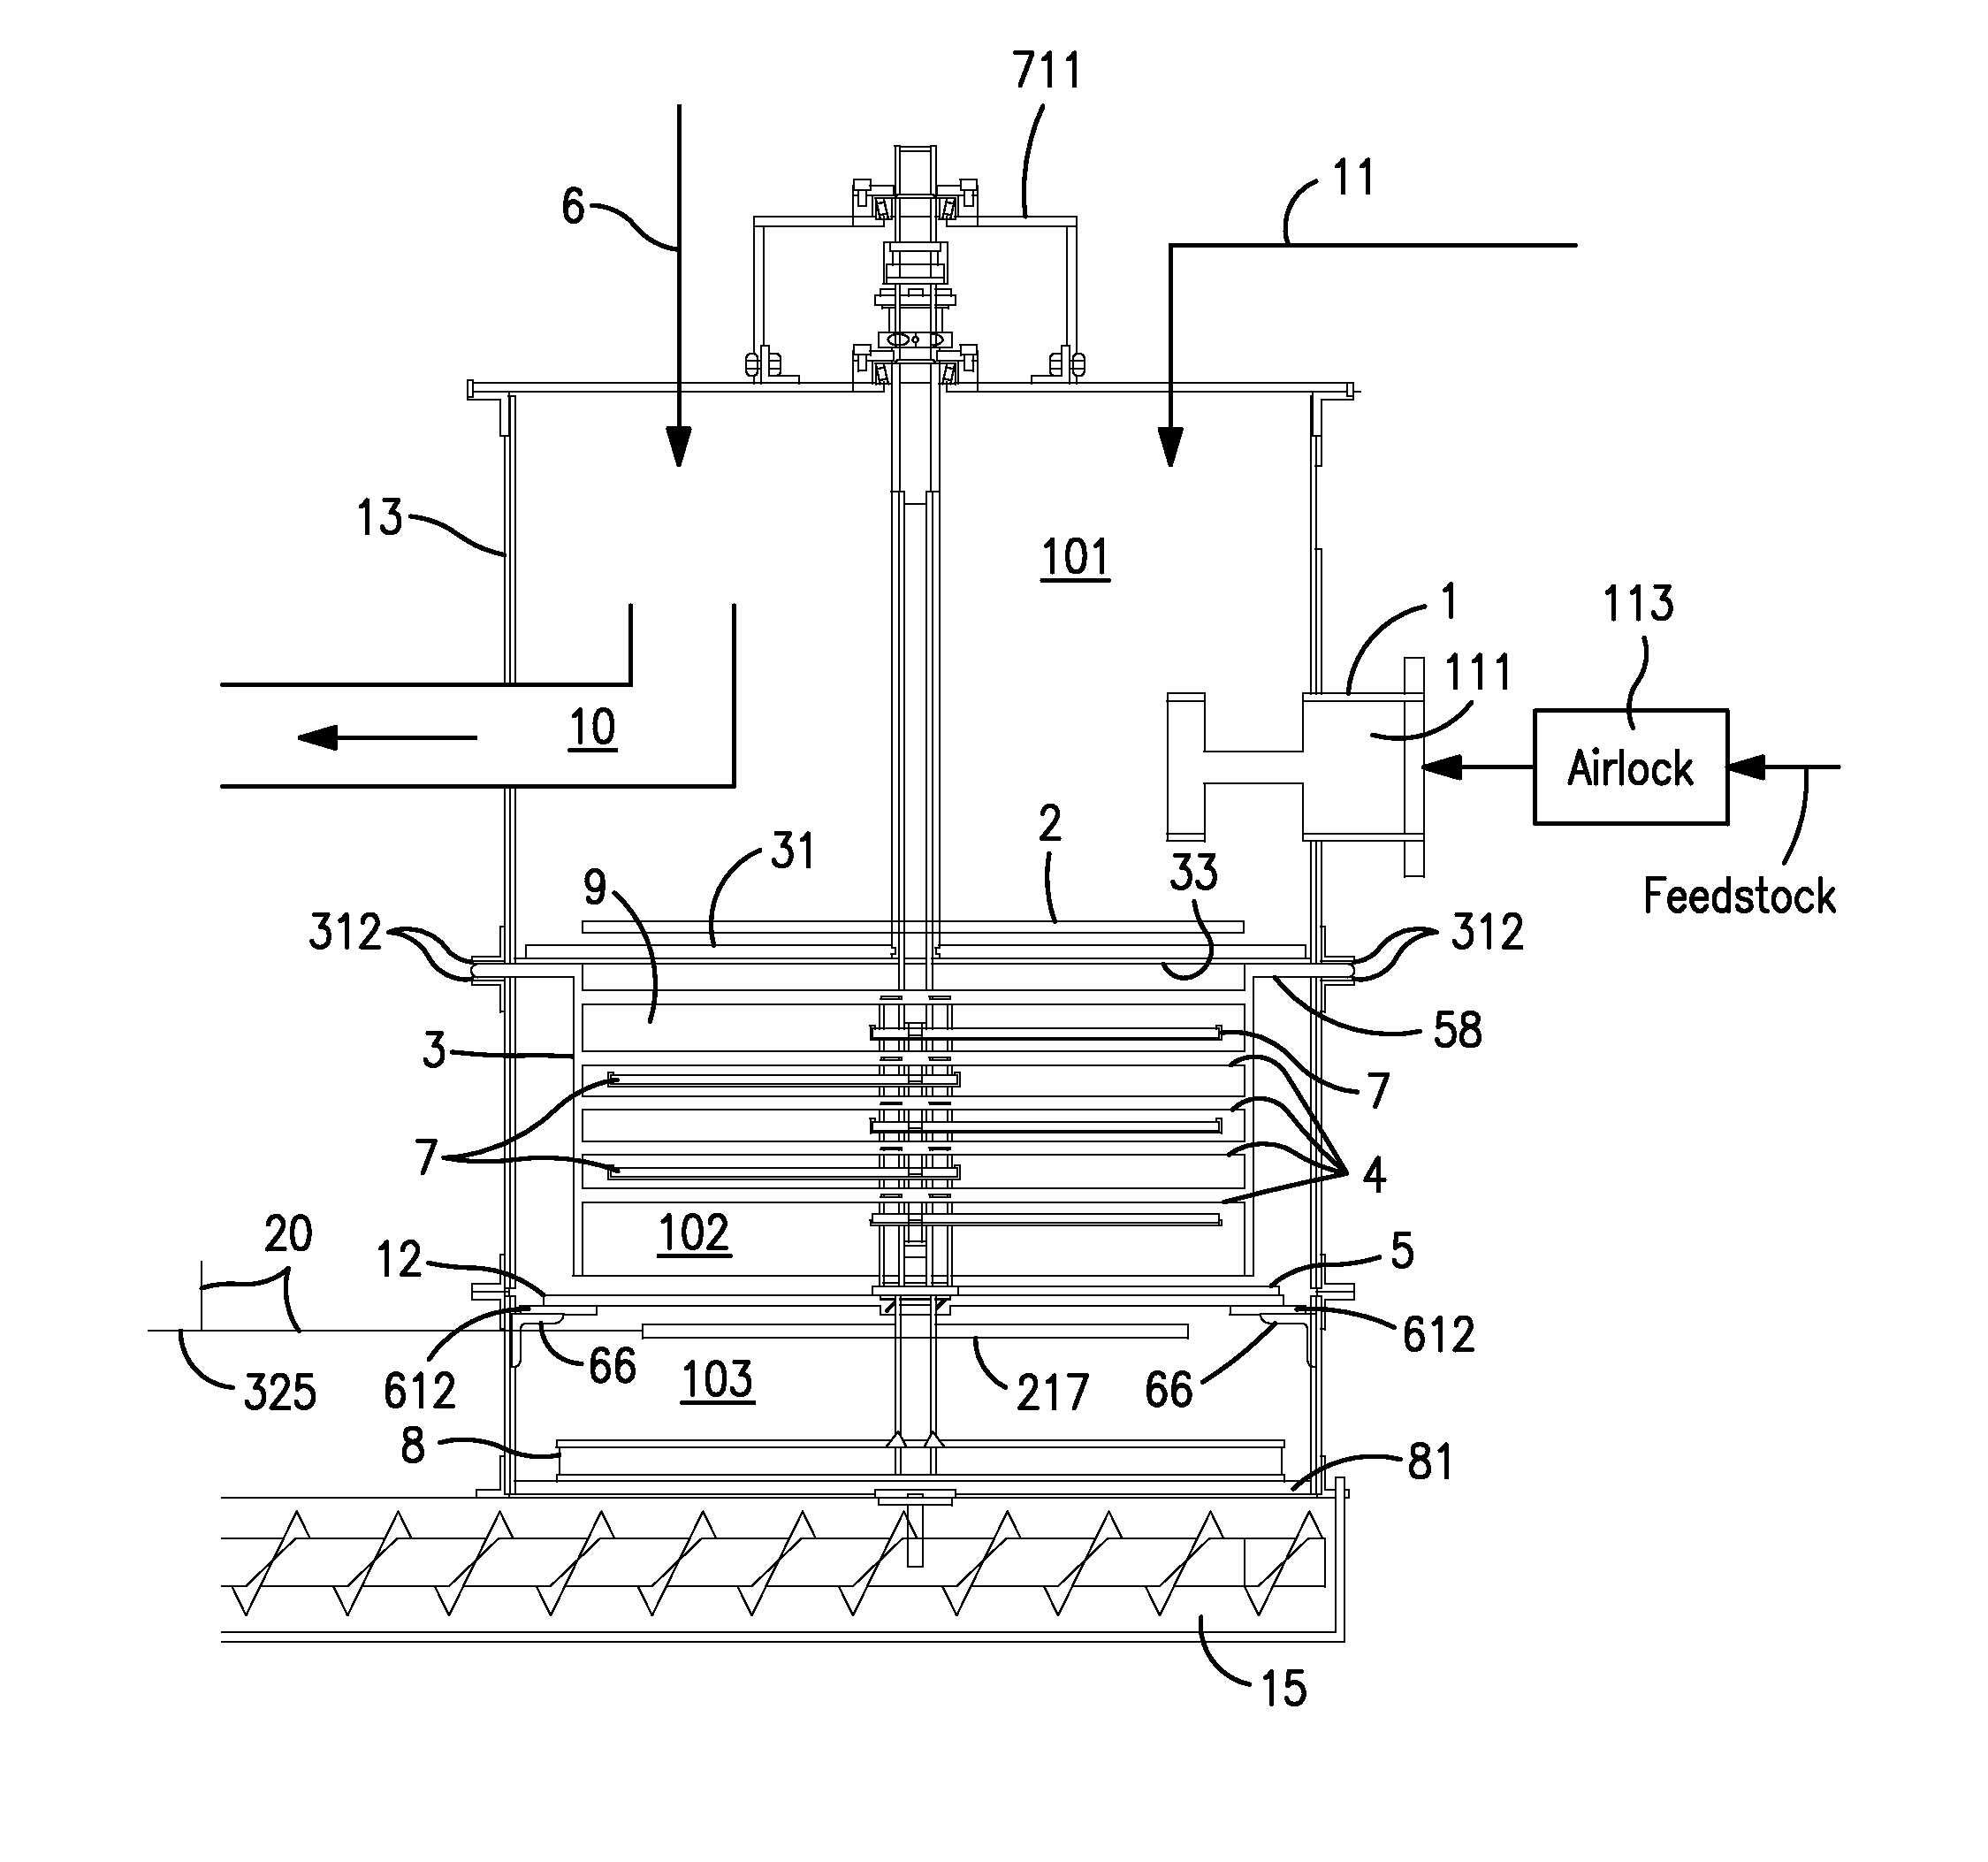 Apparatus and method for conversion of solid waste into synthetic oil, gas, and fertilizer